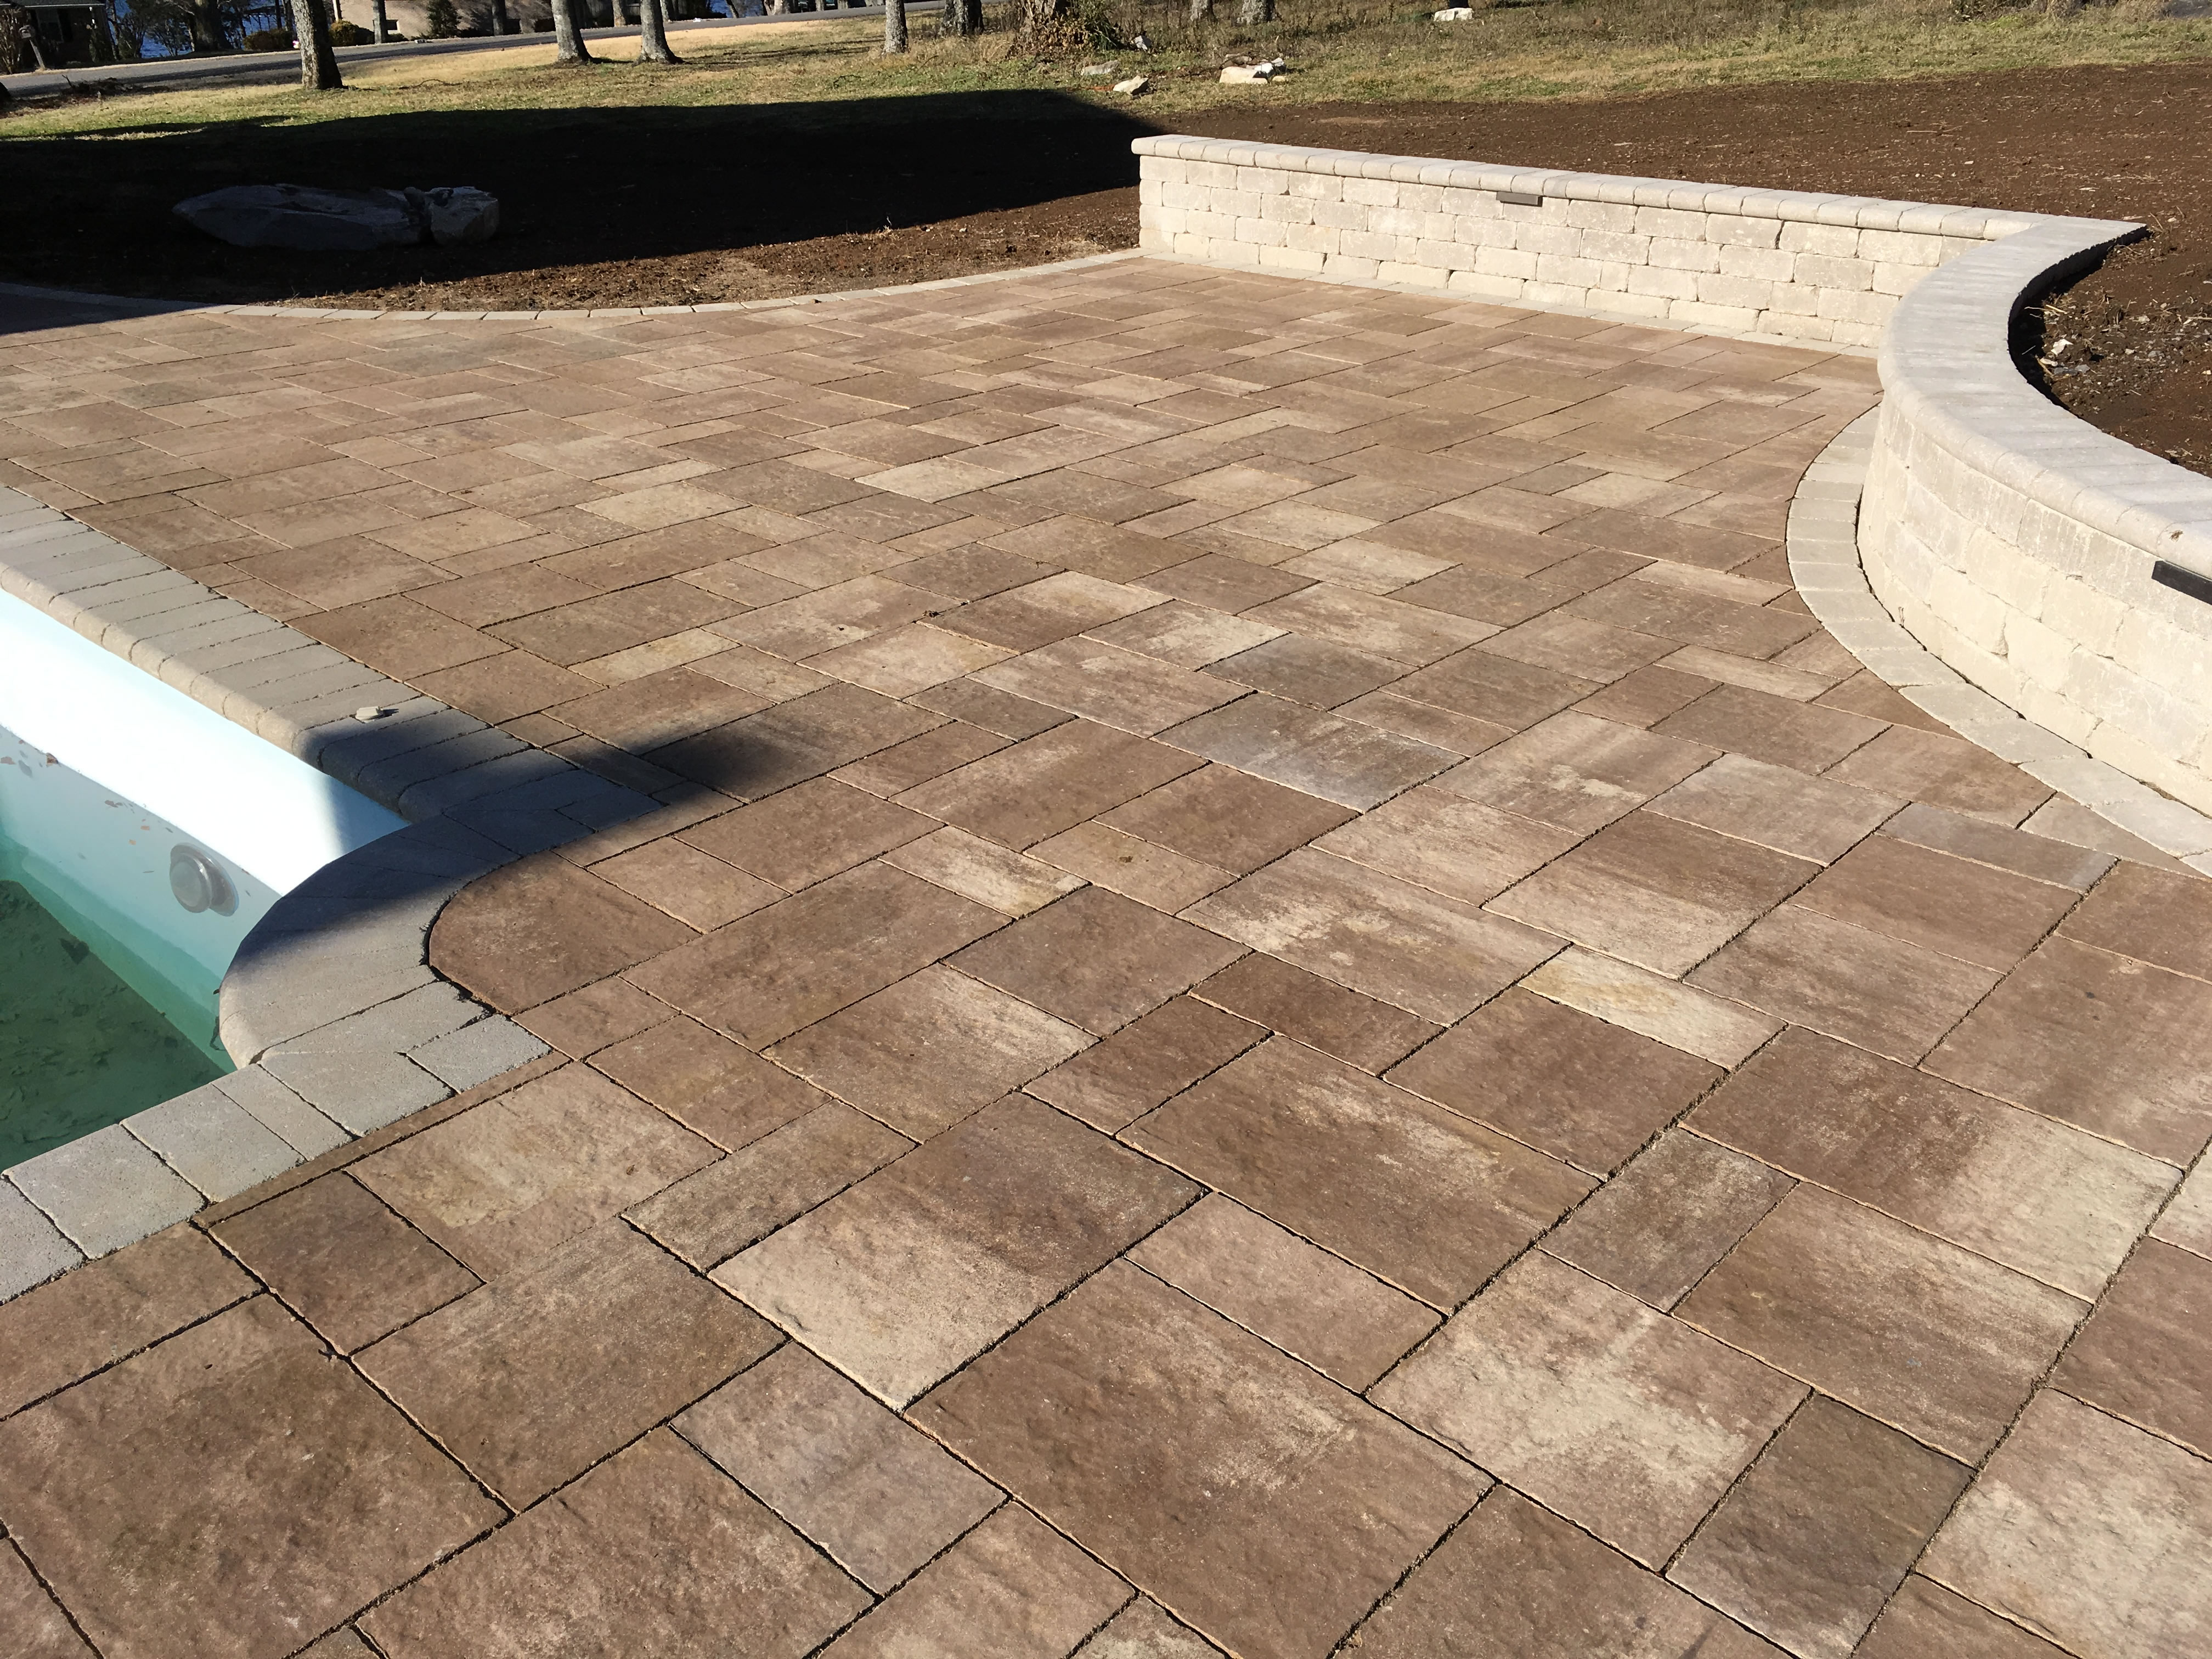 Here you see we used a contrasting color for the pool deck using UNILOCK’S Bristol Valley Paver ‘Copper Ridge color’.